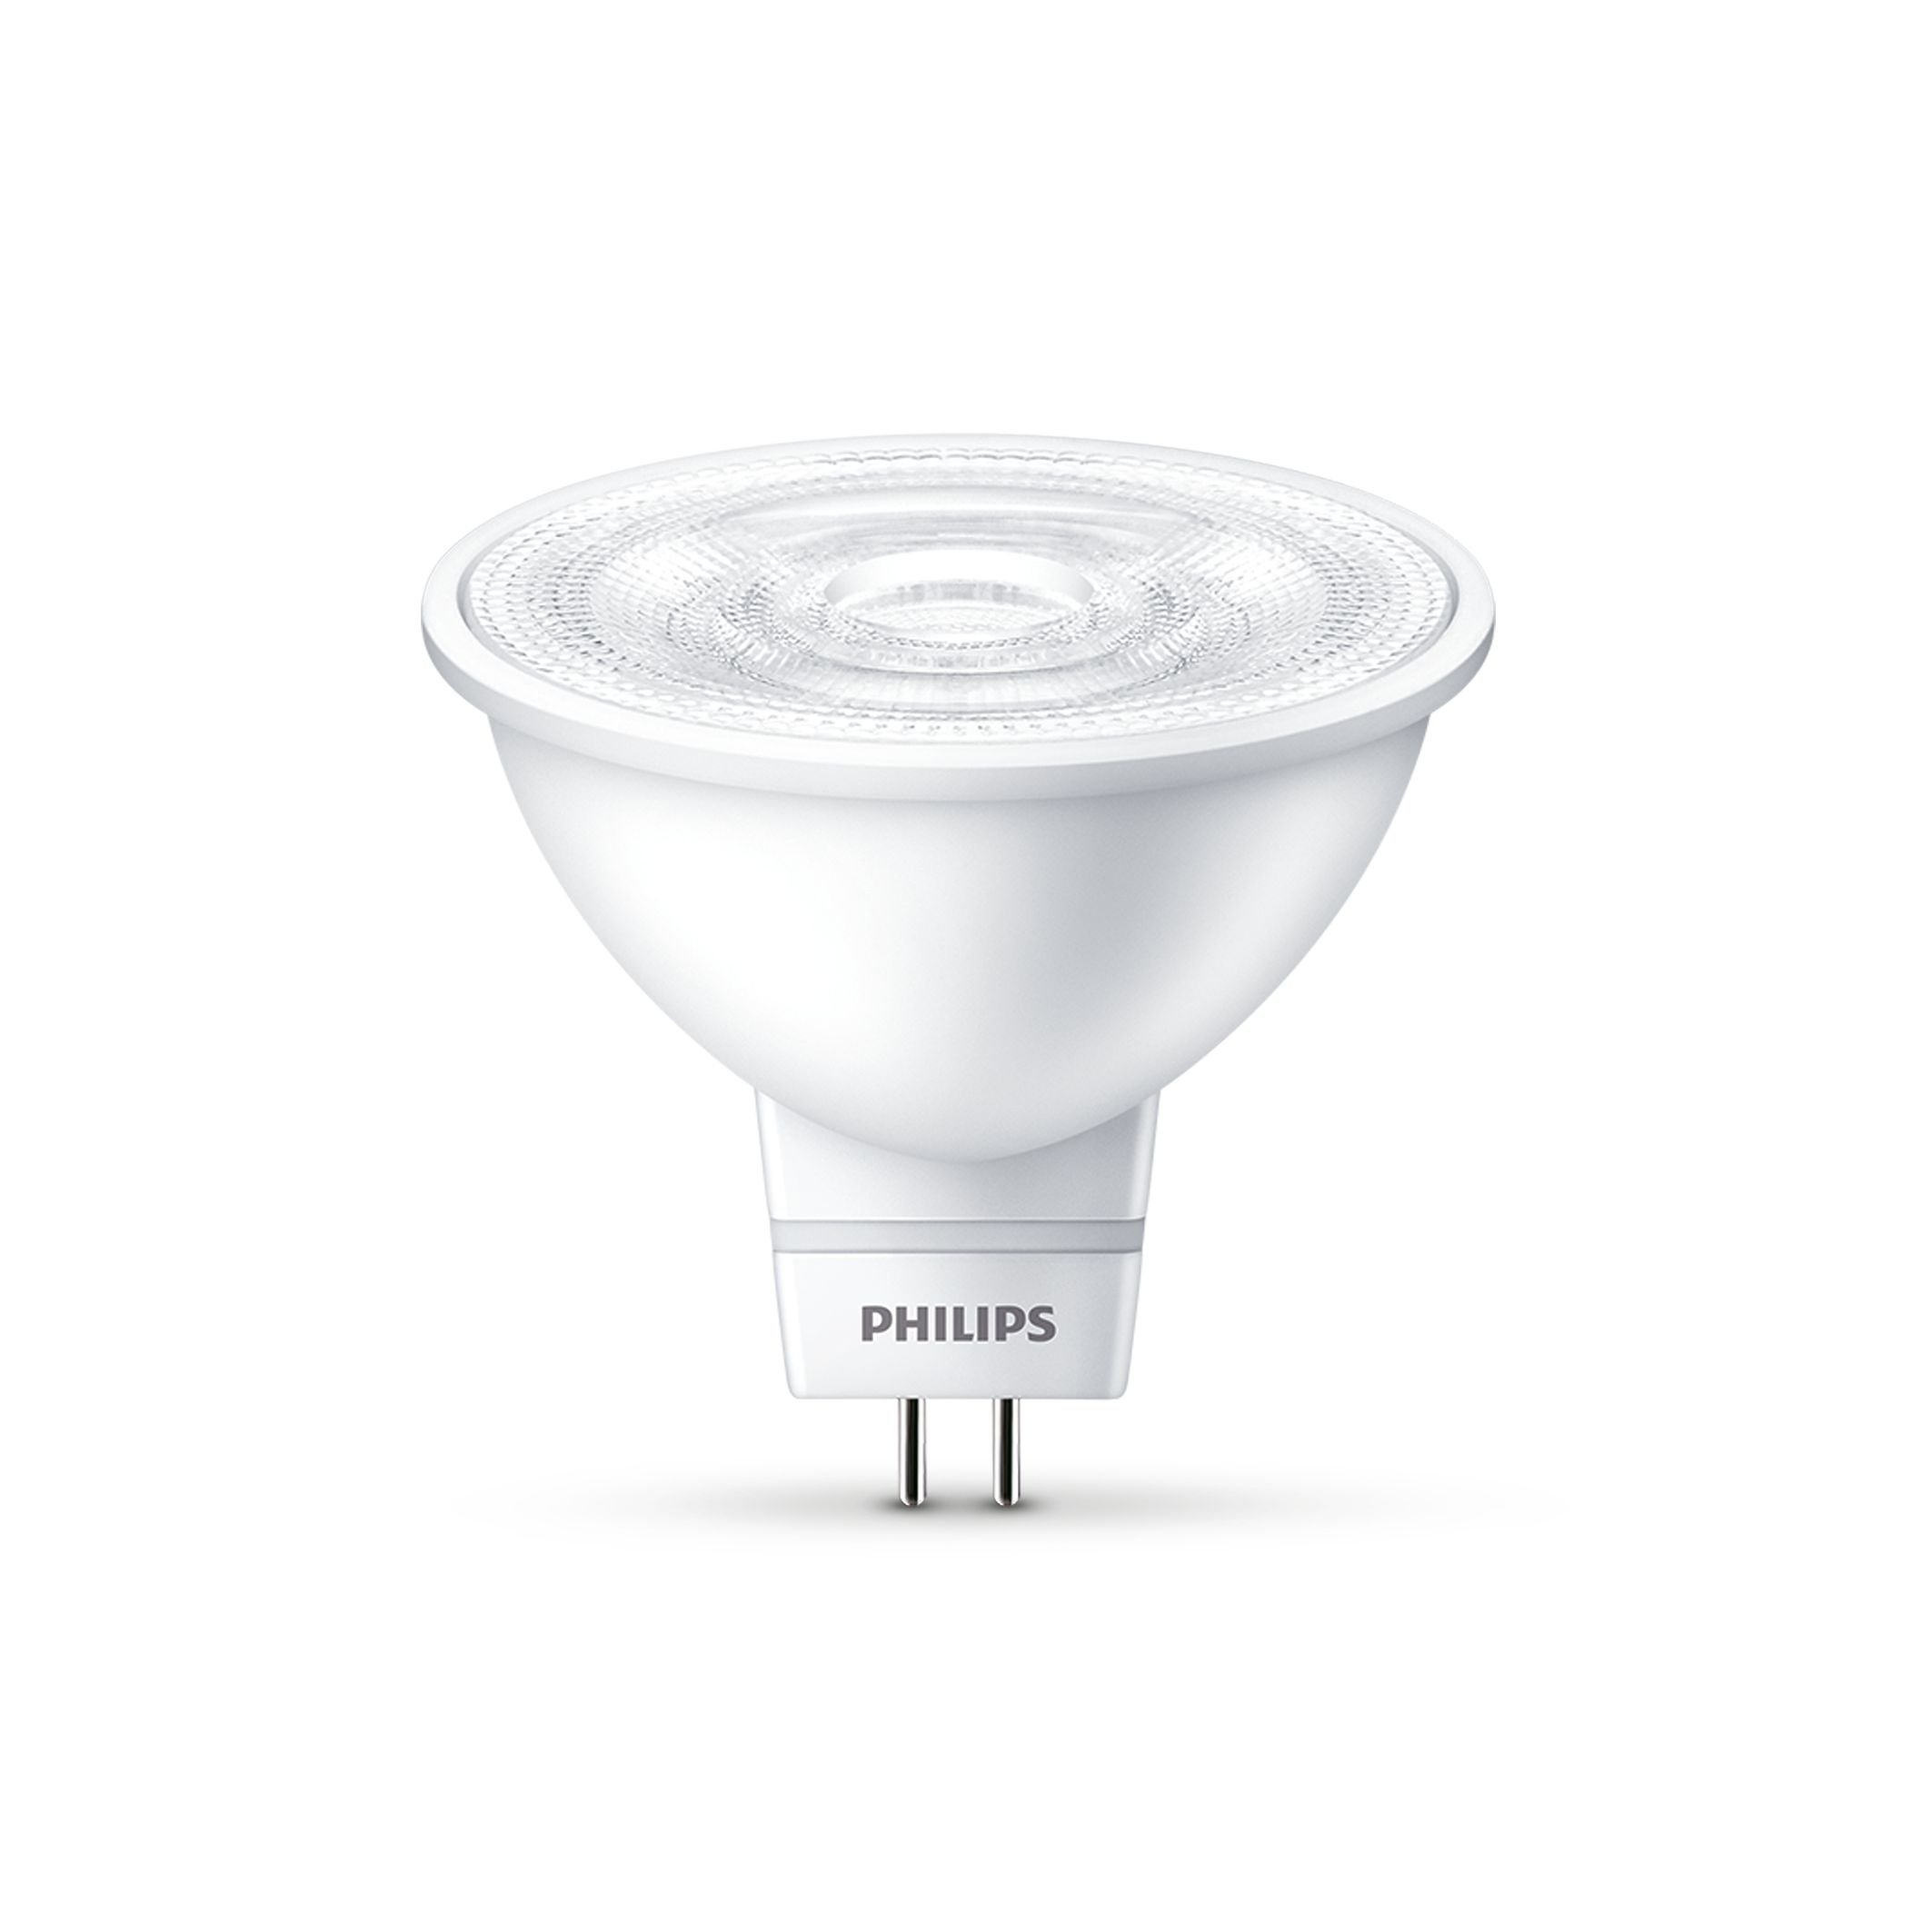 Philips MASTER LED Spot ExpertColor 6,5W MR16 Ra90 warmweiss 36° dimmbar 8 ... 